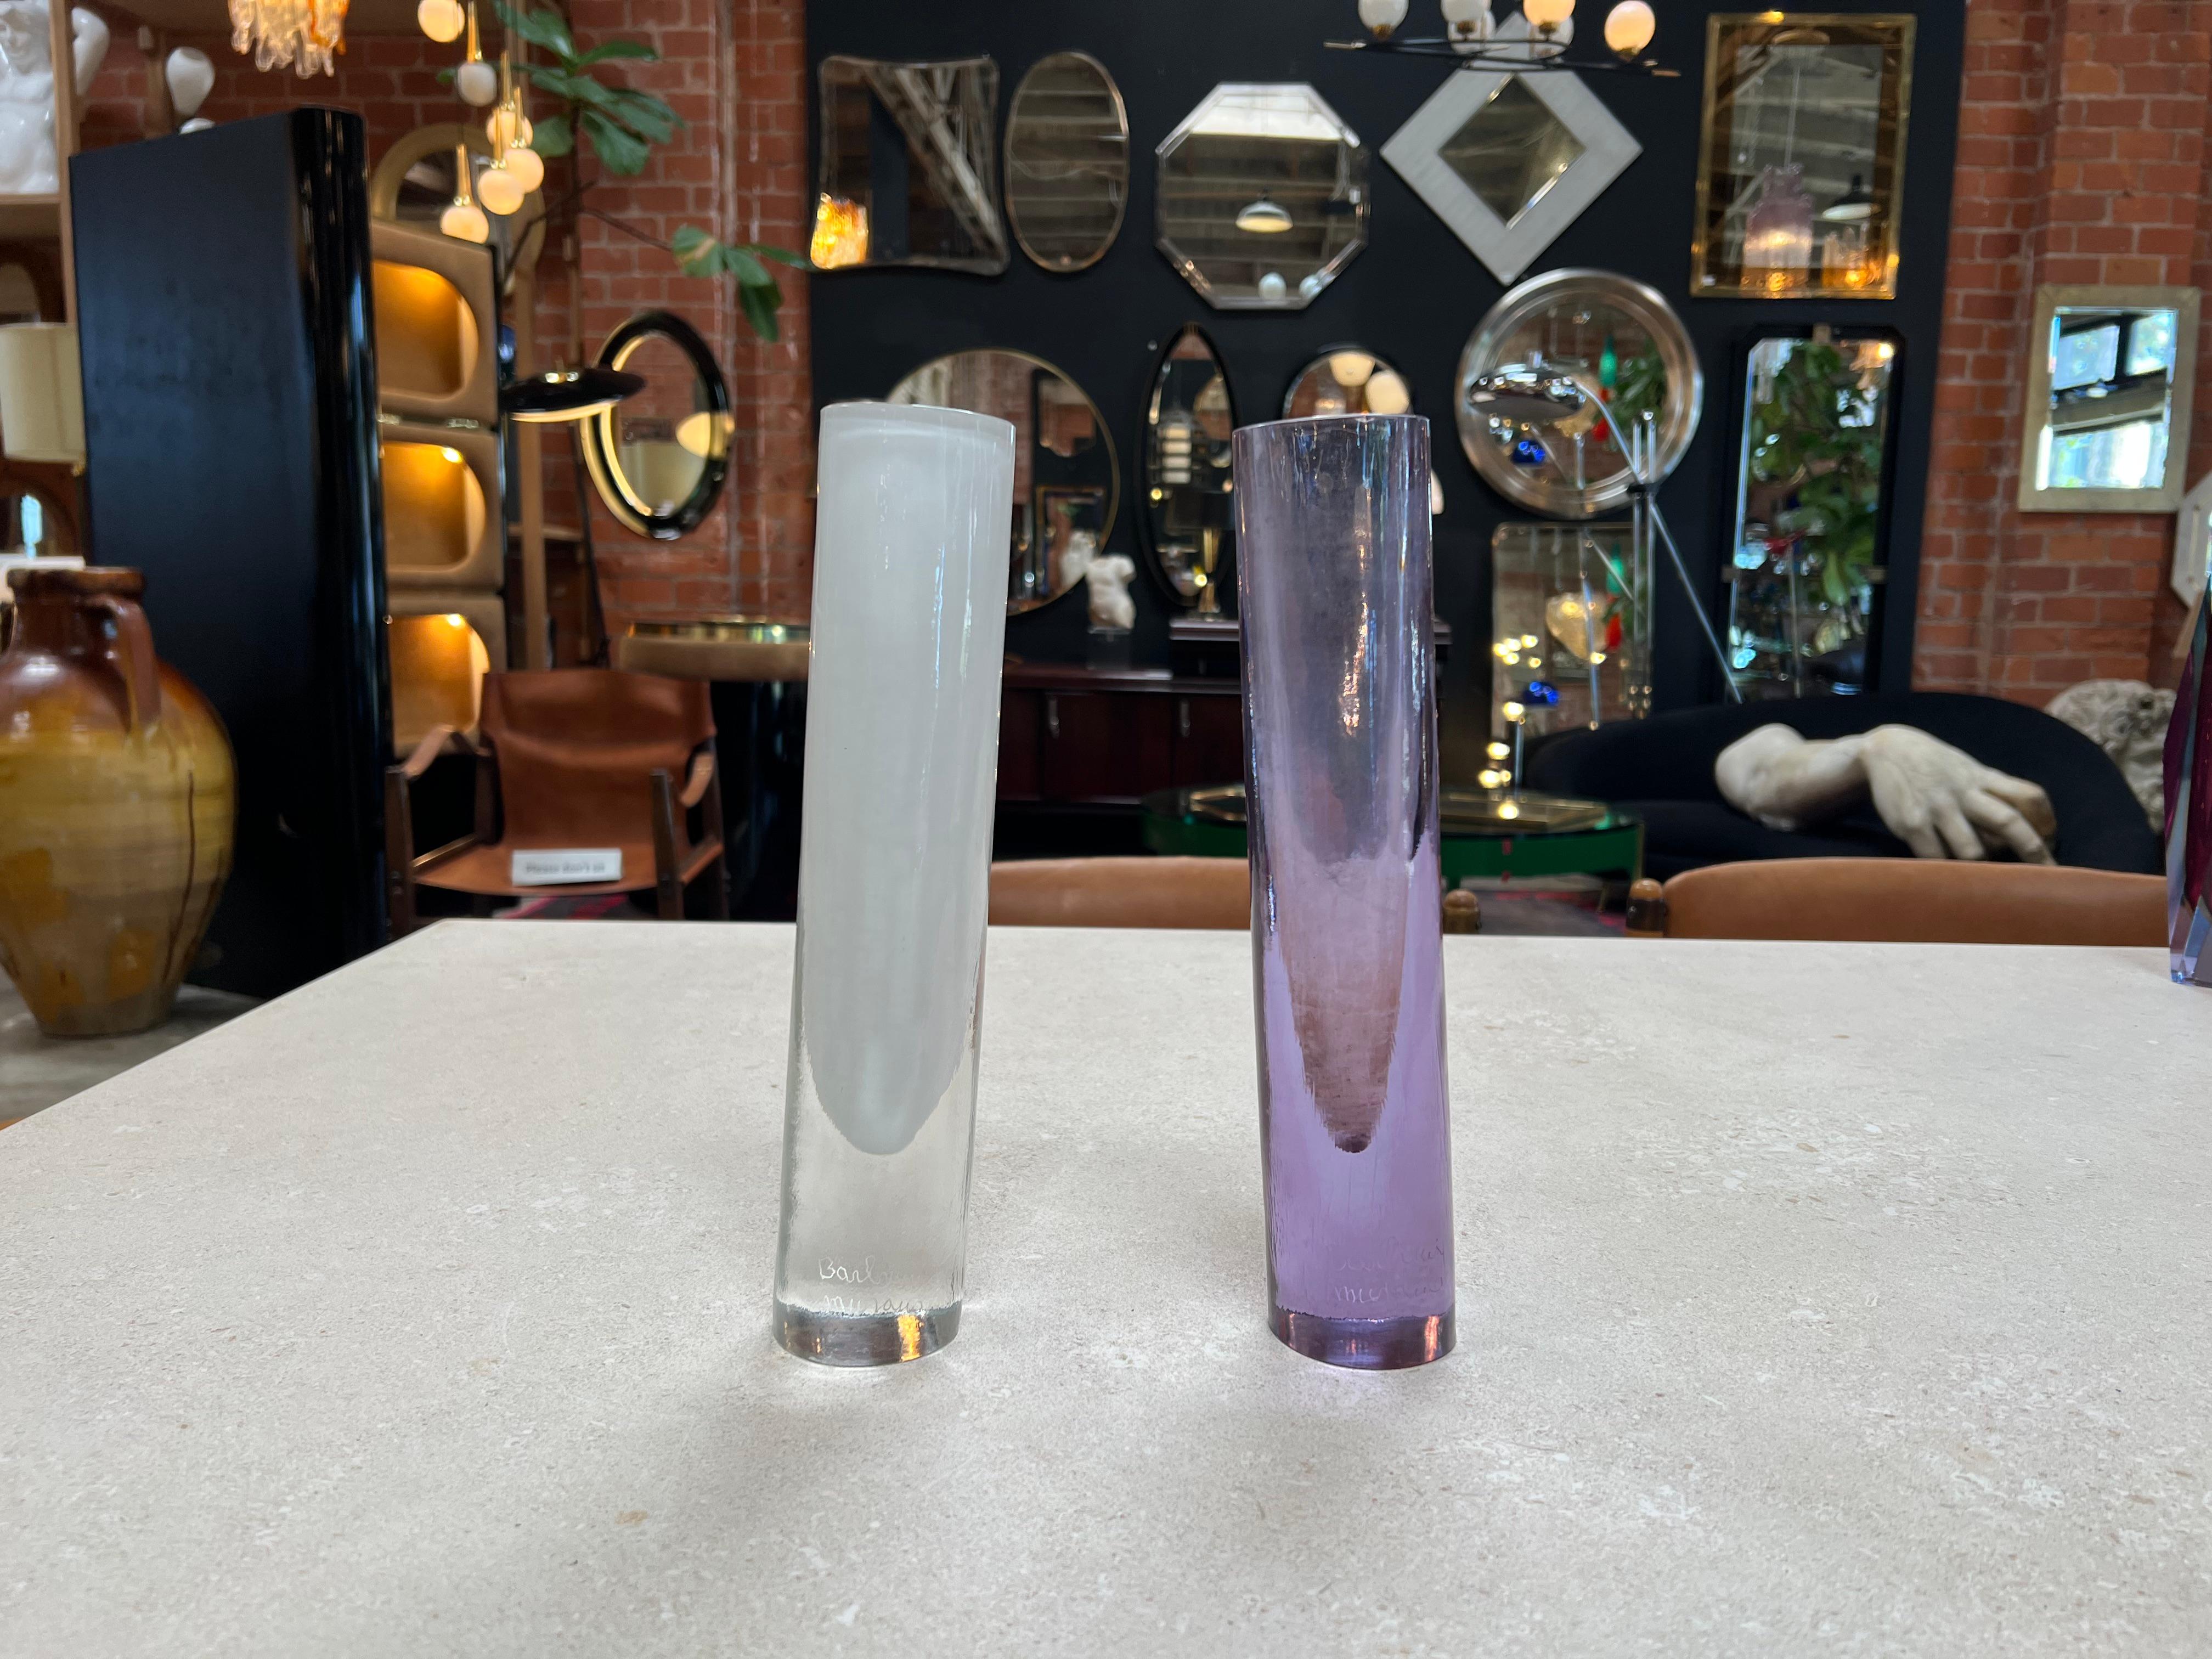 The Pair of 2 Italian Decorative Murano Small Vases from the 1960s is a duo of exquisite handcrafted vases hailing from Murano, Italy. These delicate pieces reflect the renowned Murano glass-making tradition, featuring intricate designs and vibrant